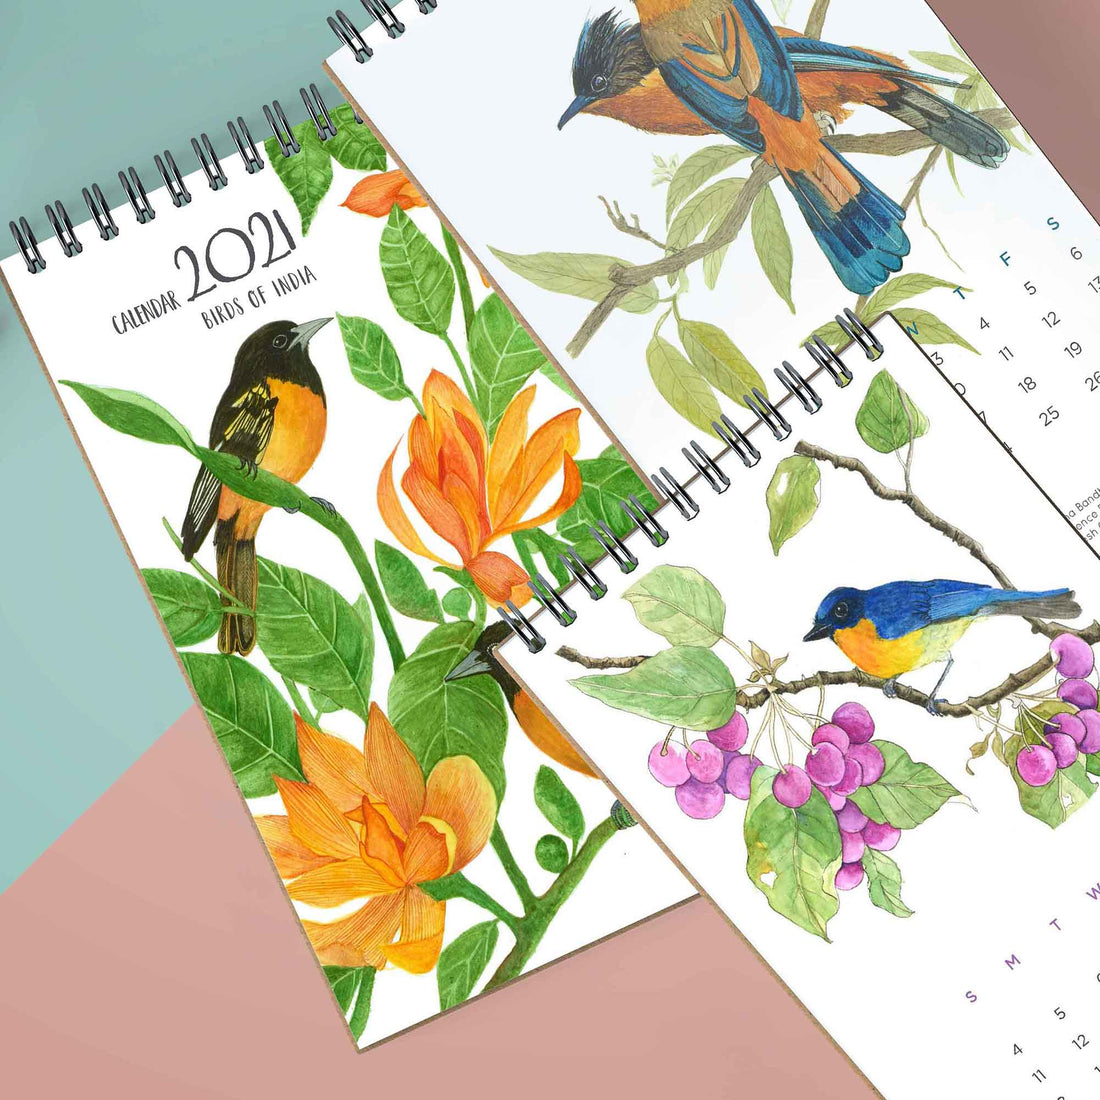 Birds of India 2021 Calendar featured by Mid Day